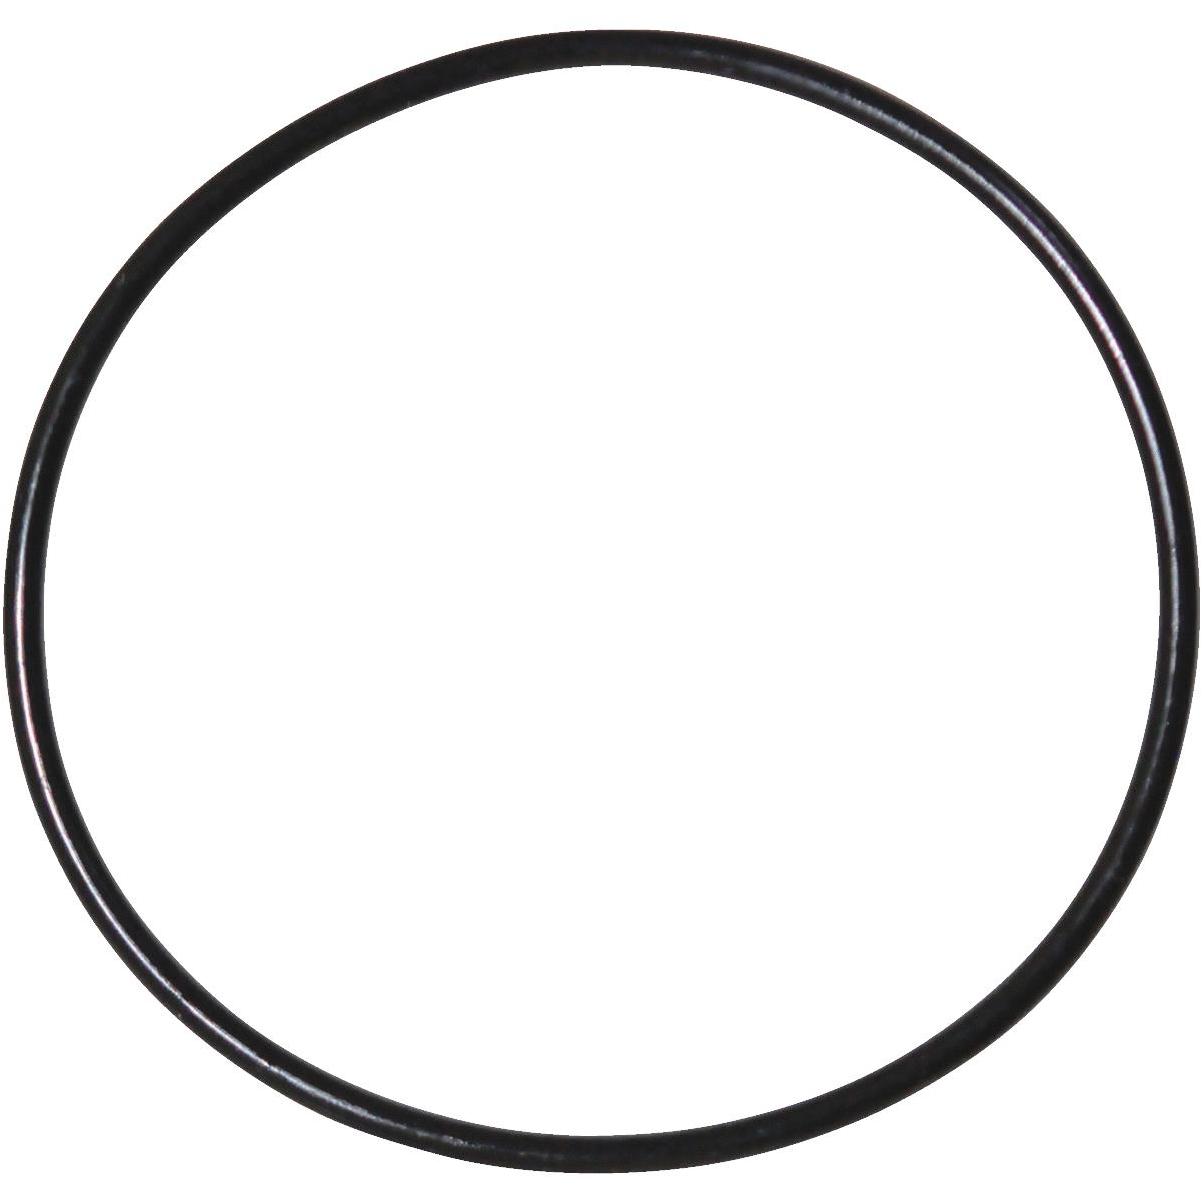 Buy China Wholesale Durable Black Elastic Silicone-rubber O-rings/ Flat  Washers/o-gasket Sealing & Waterproof Silicone Rubber Seal O-rings $0.003 |  Globalsources.com